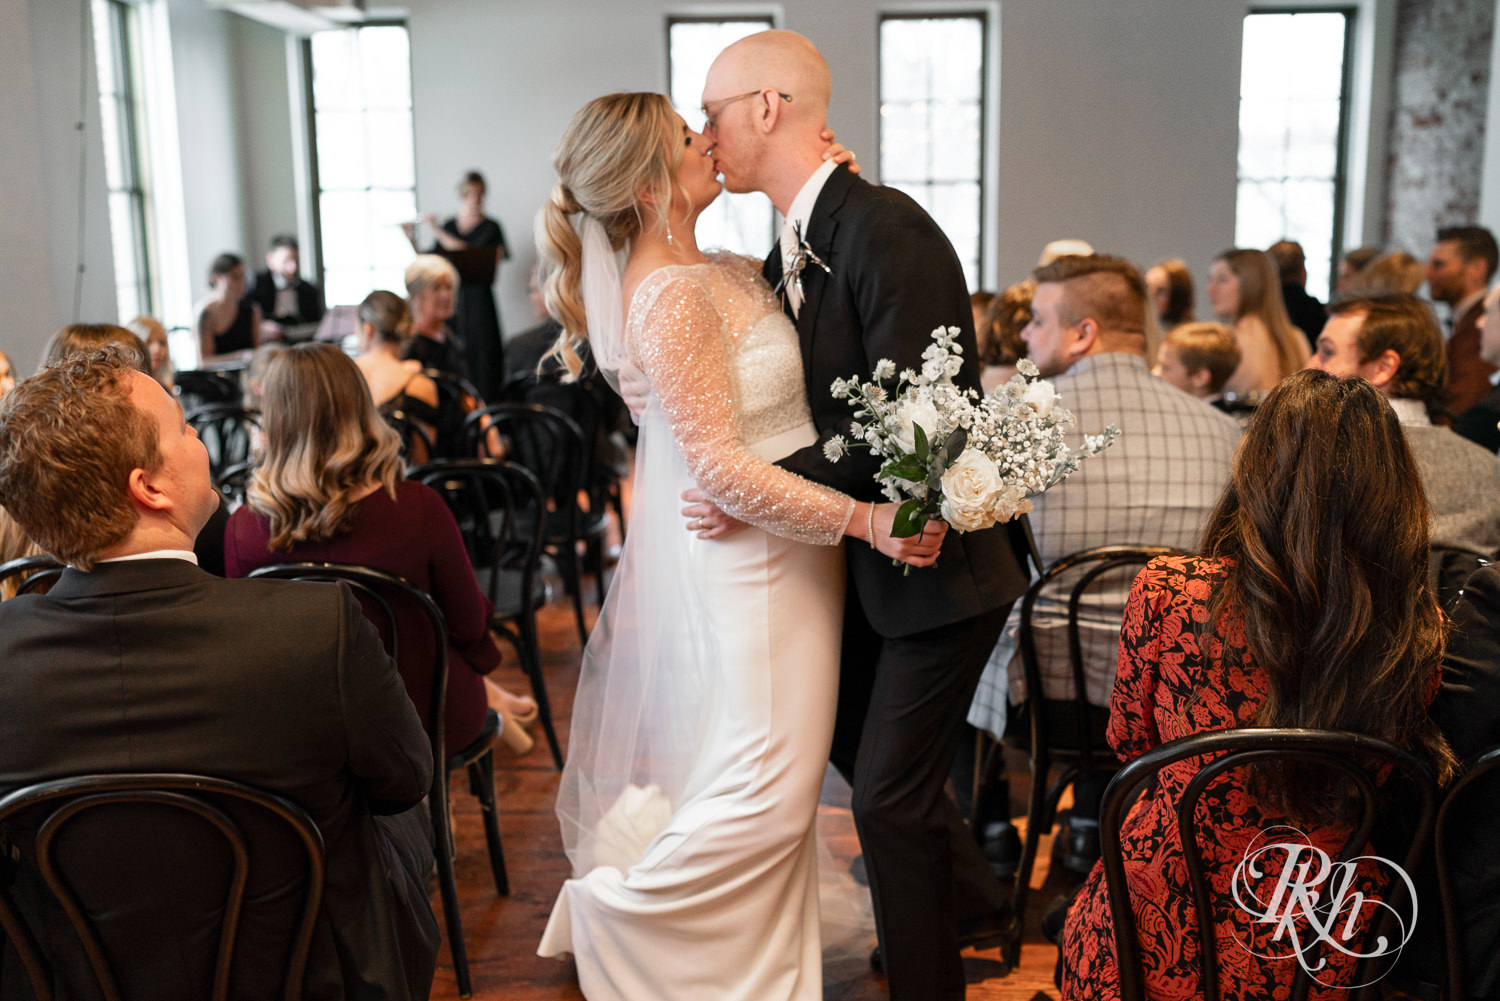 Bride and groom kiss during indoor wedding ceremony at Gatherings at Station 10 in Saint Paul, Minnesota.